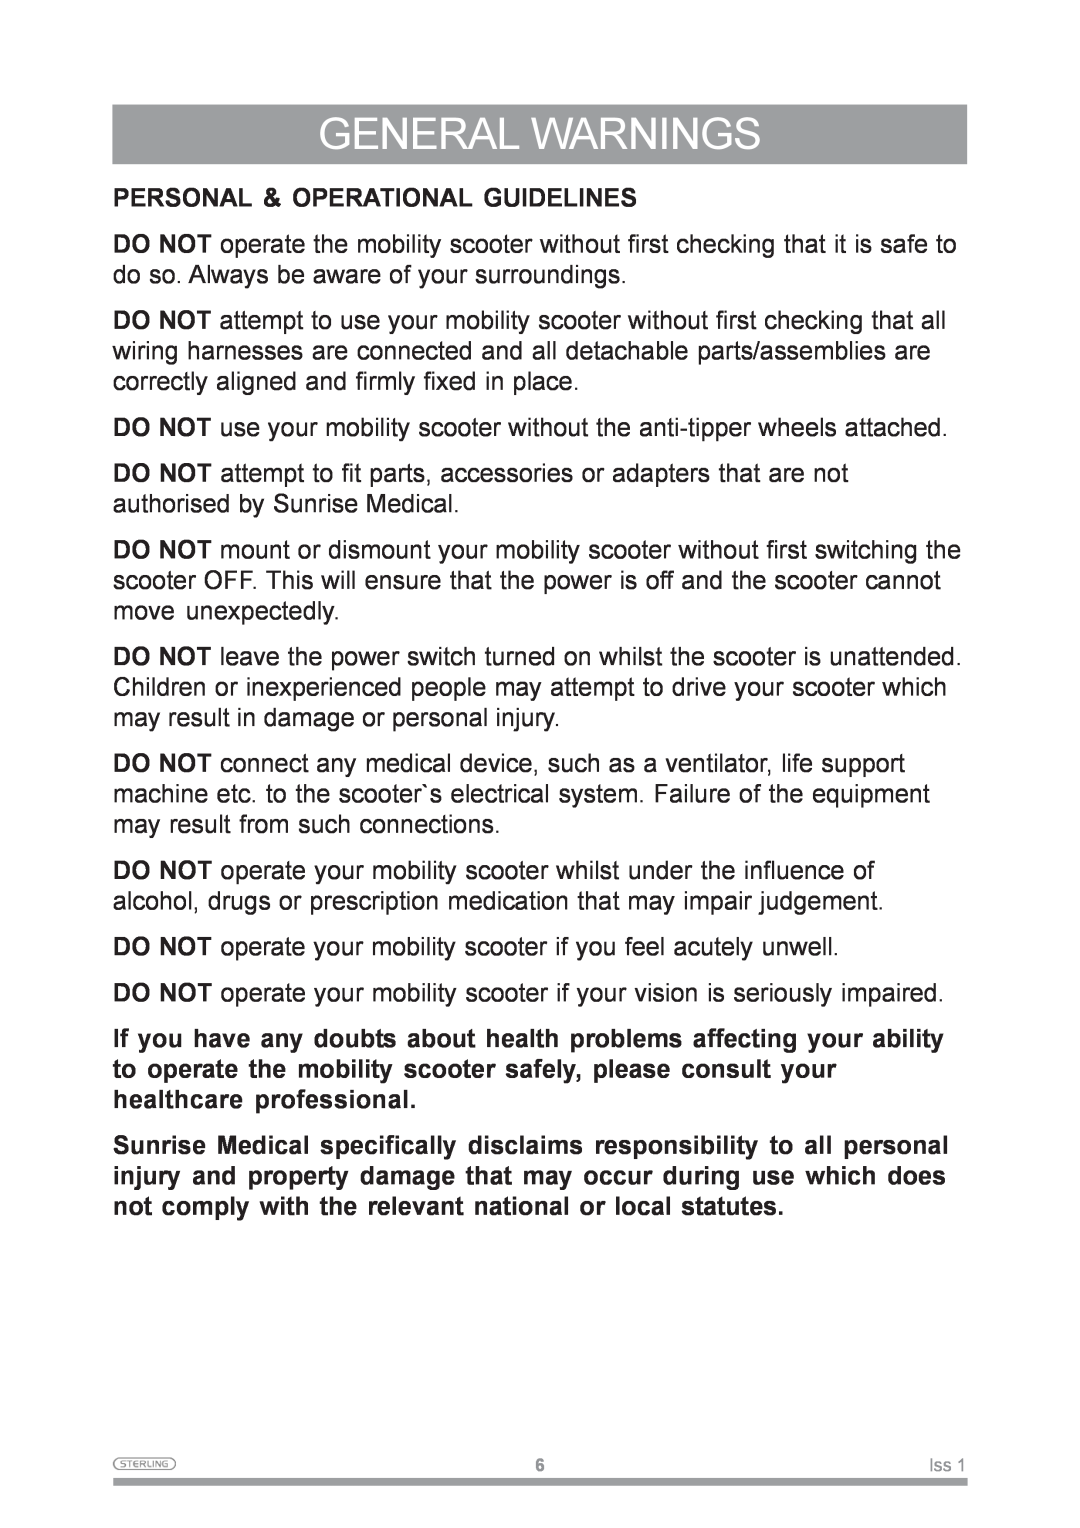 Sunrise Medical Mobility Scooter owner manual General Warnings, Personal & Operational Guidelines 